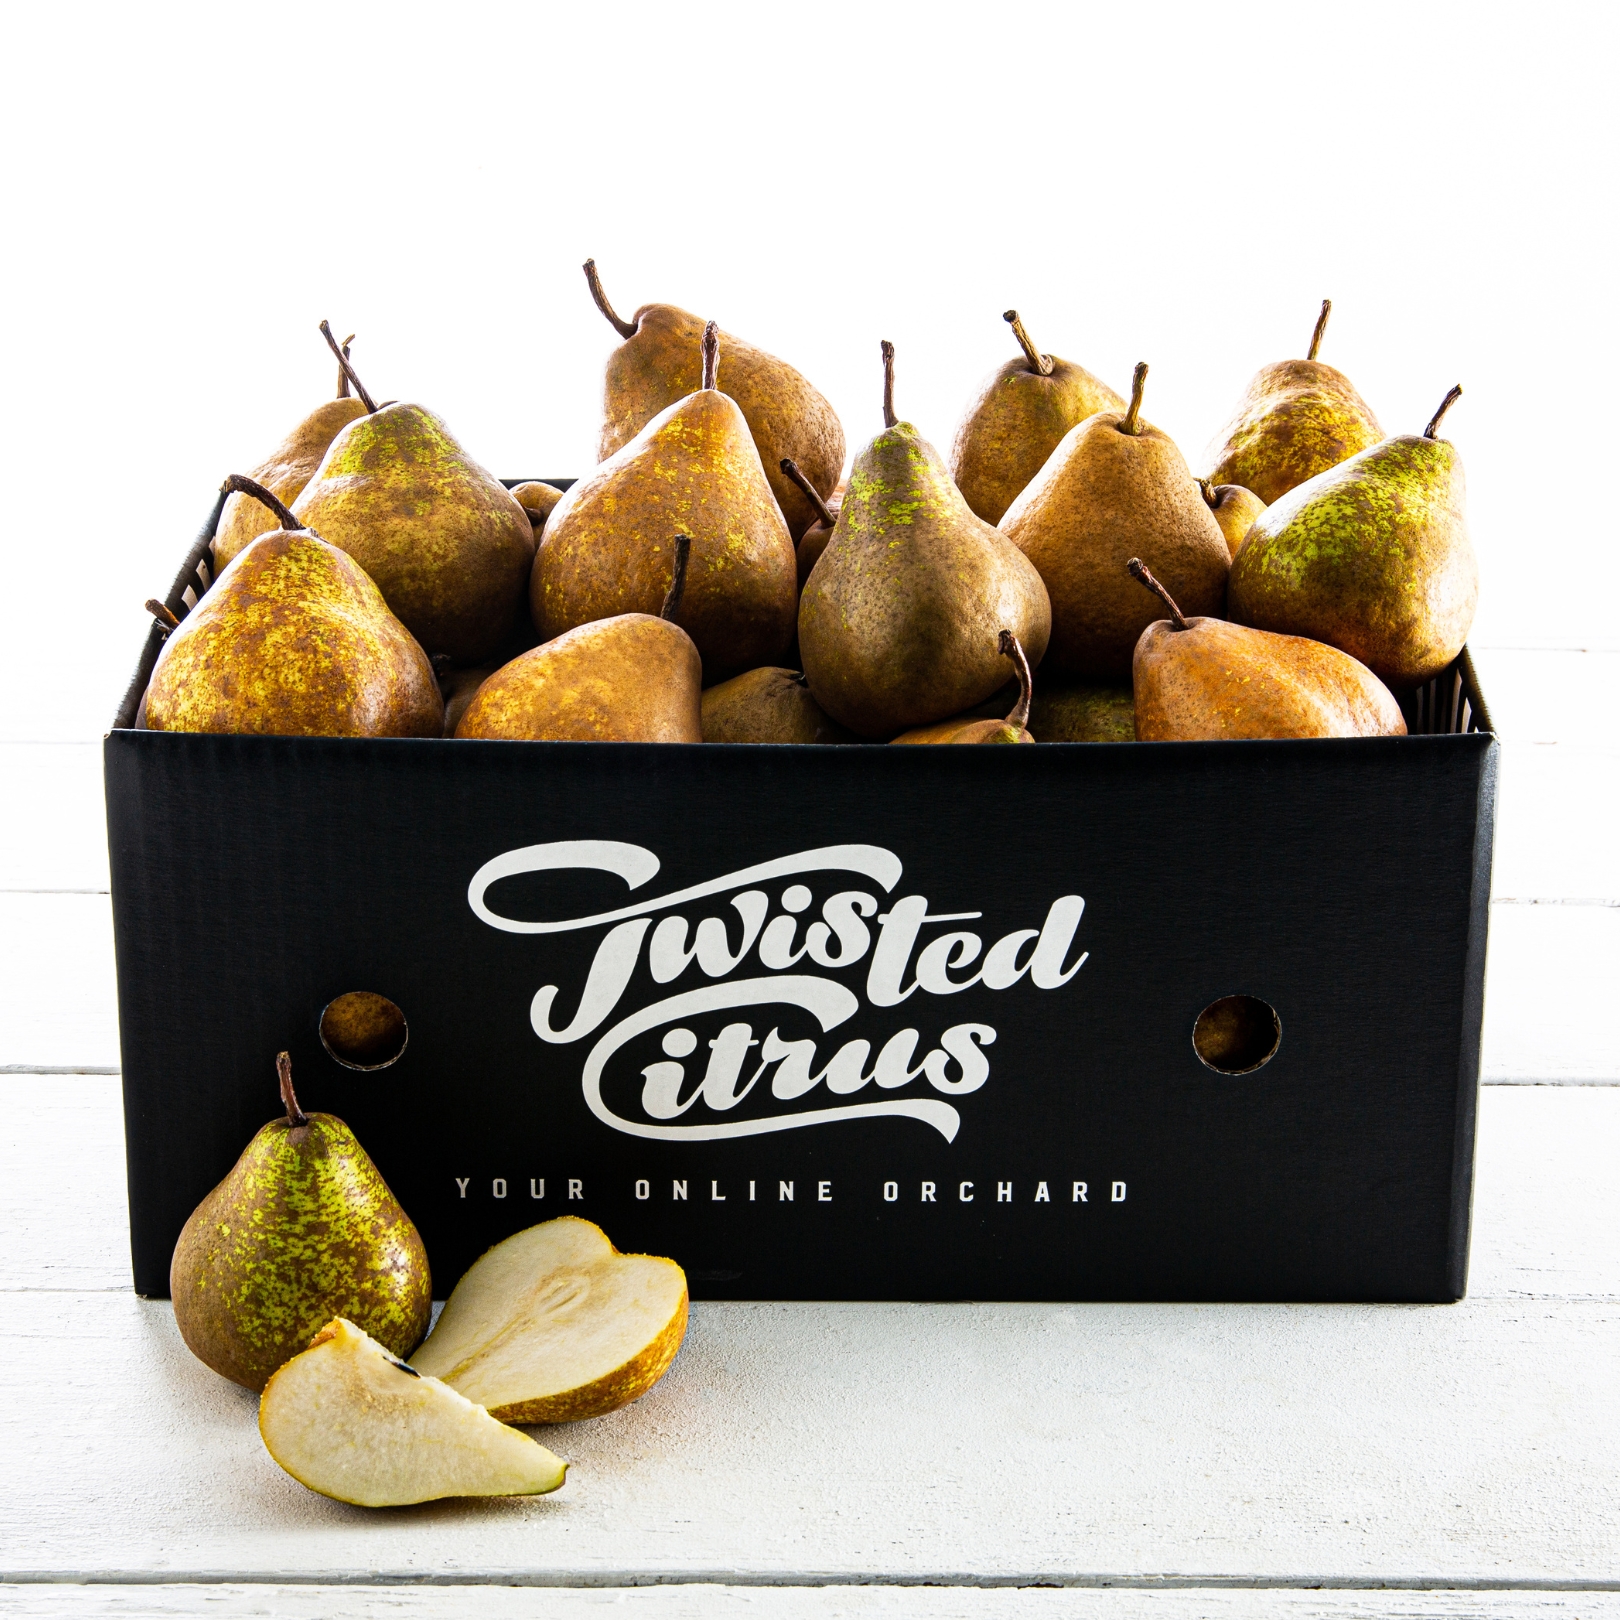 Pears - Nelis fruit box delivery nz